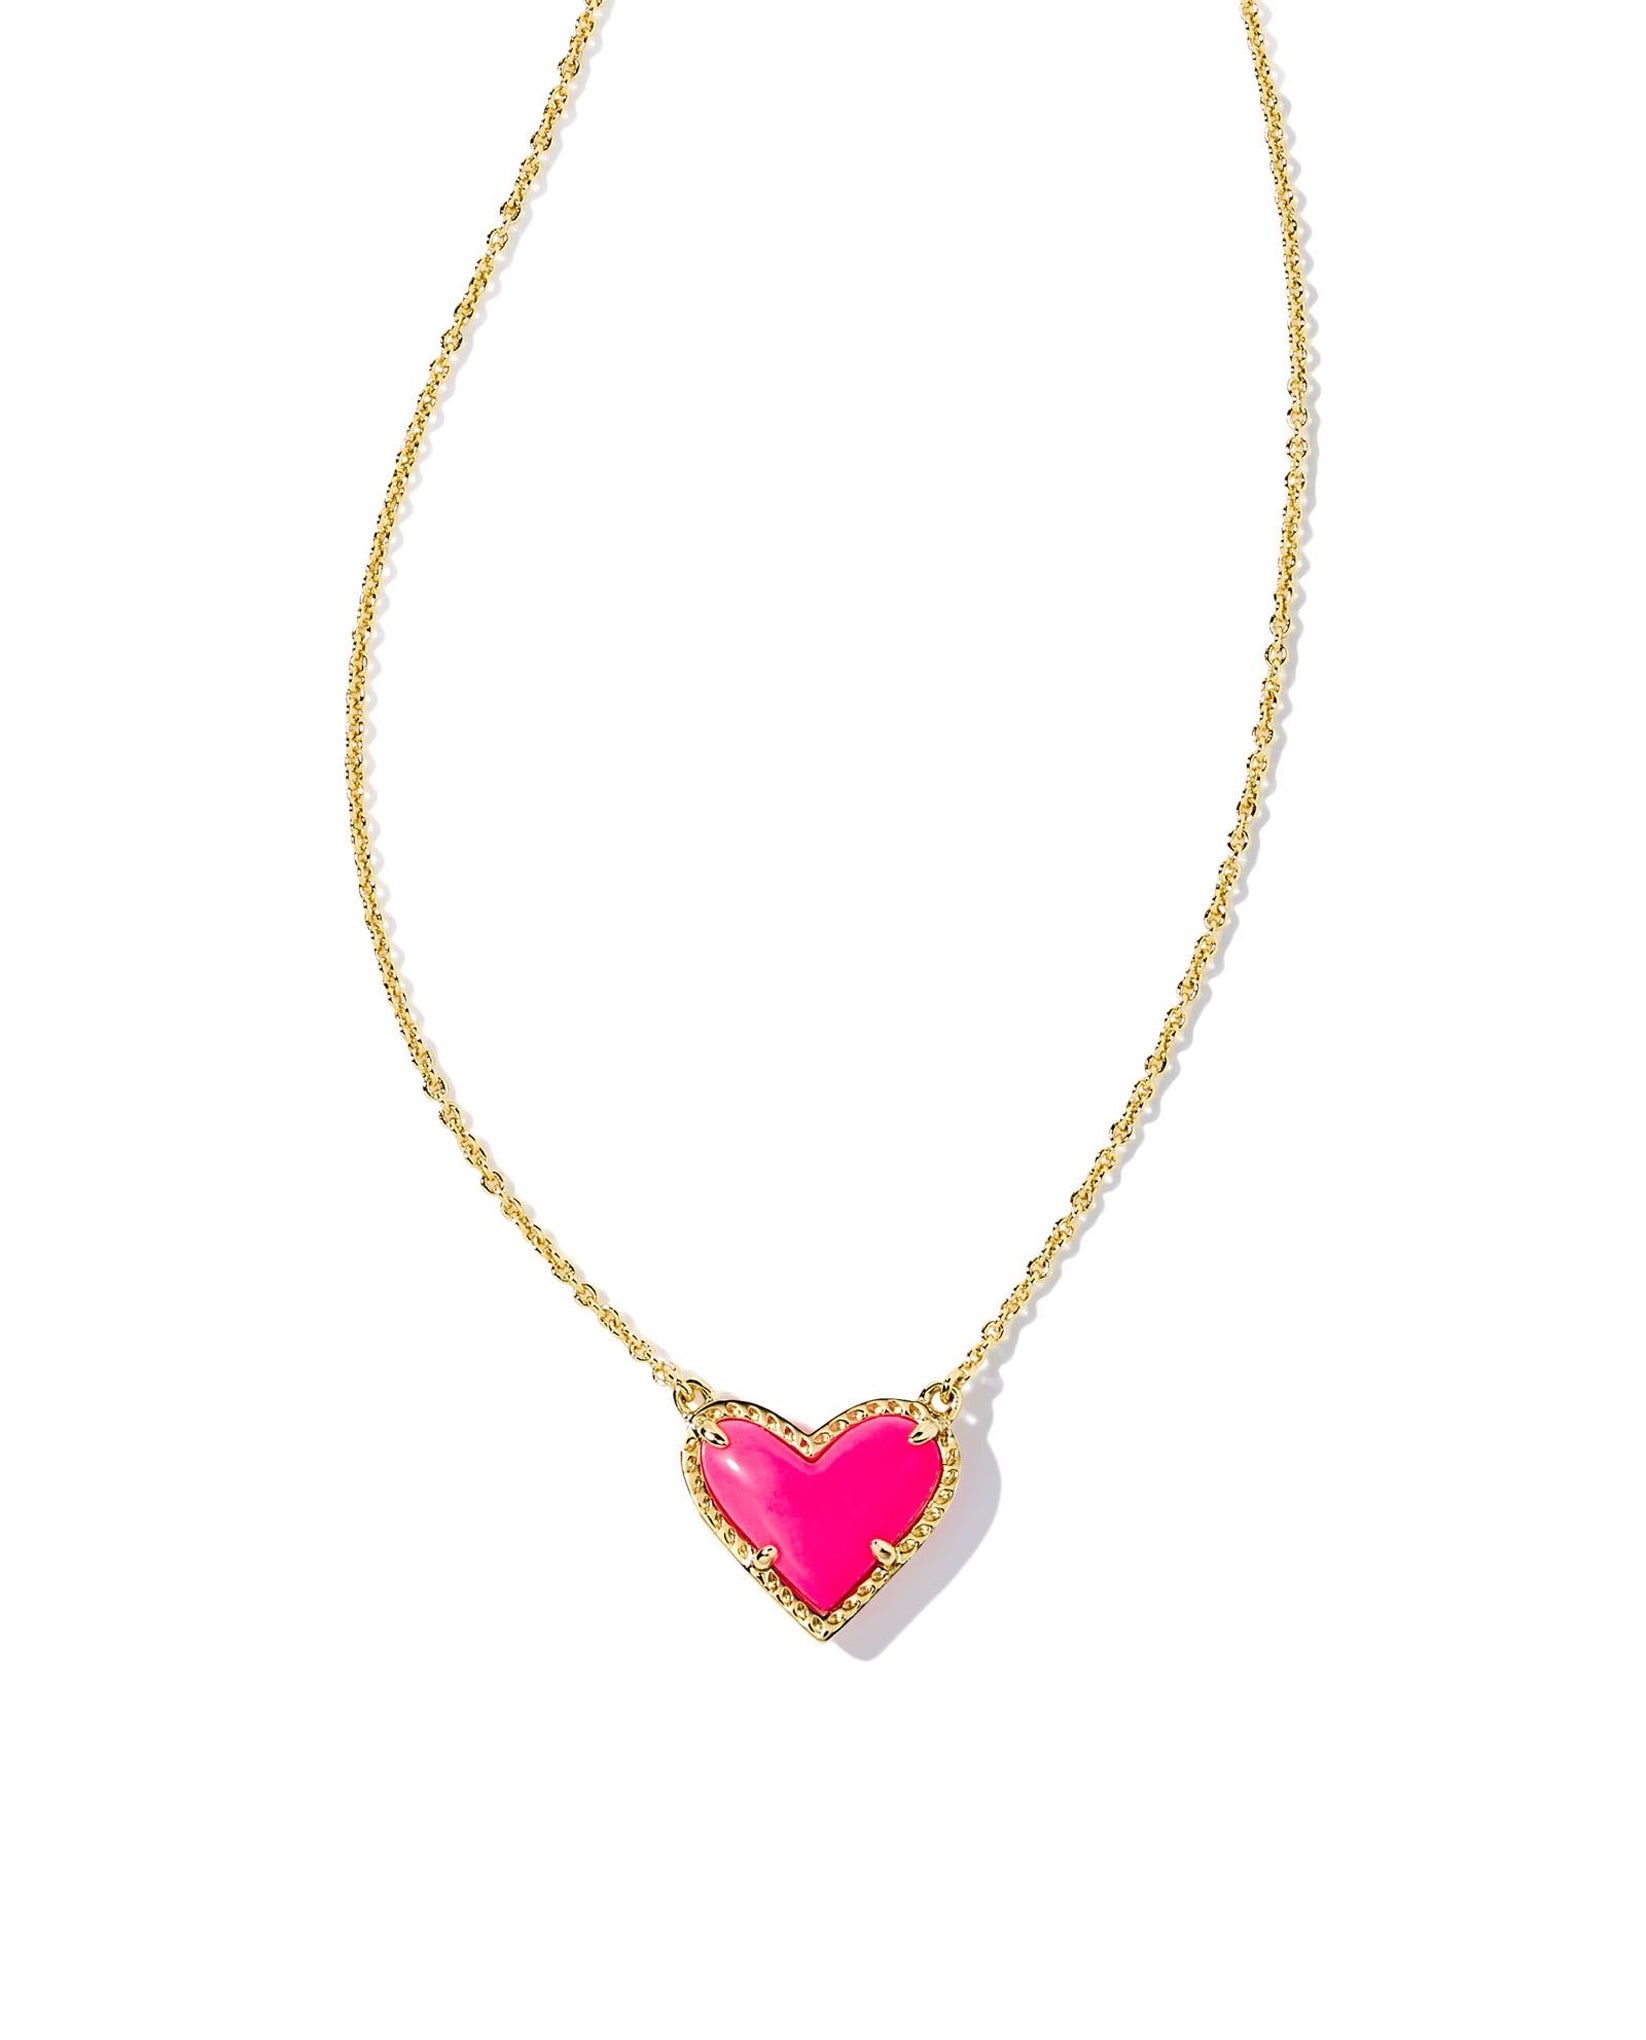 Kendra Scott Ari Heart Pendant Necklace in Neon Pink Magnesite and Gold Plated